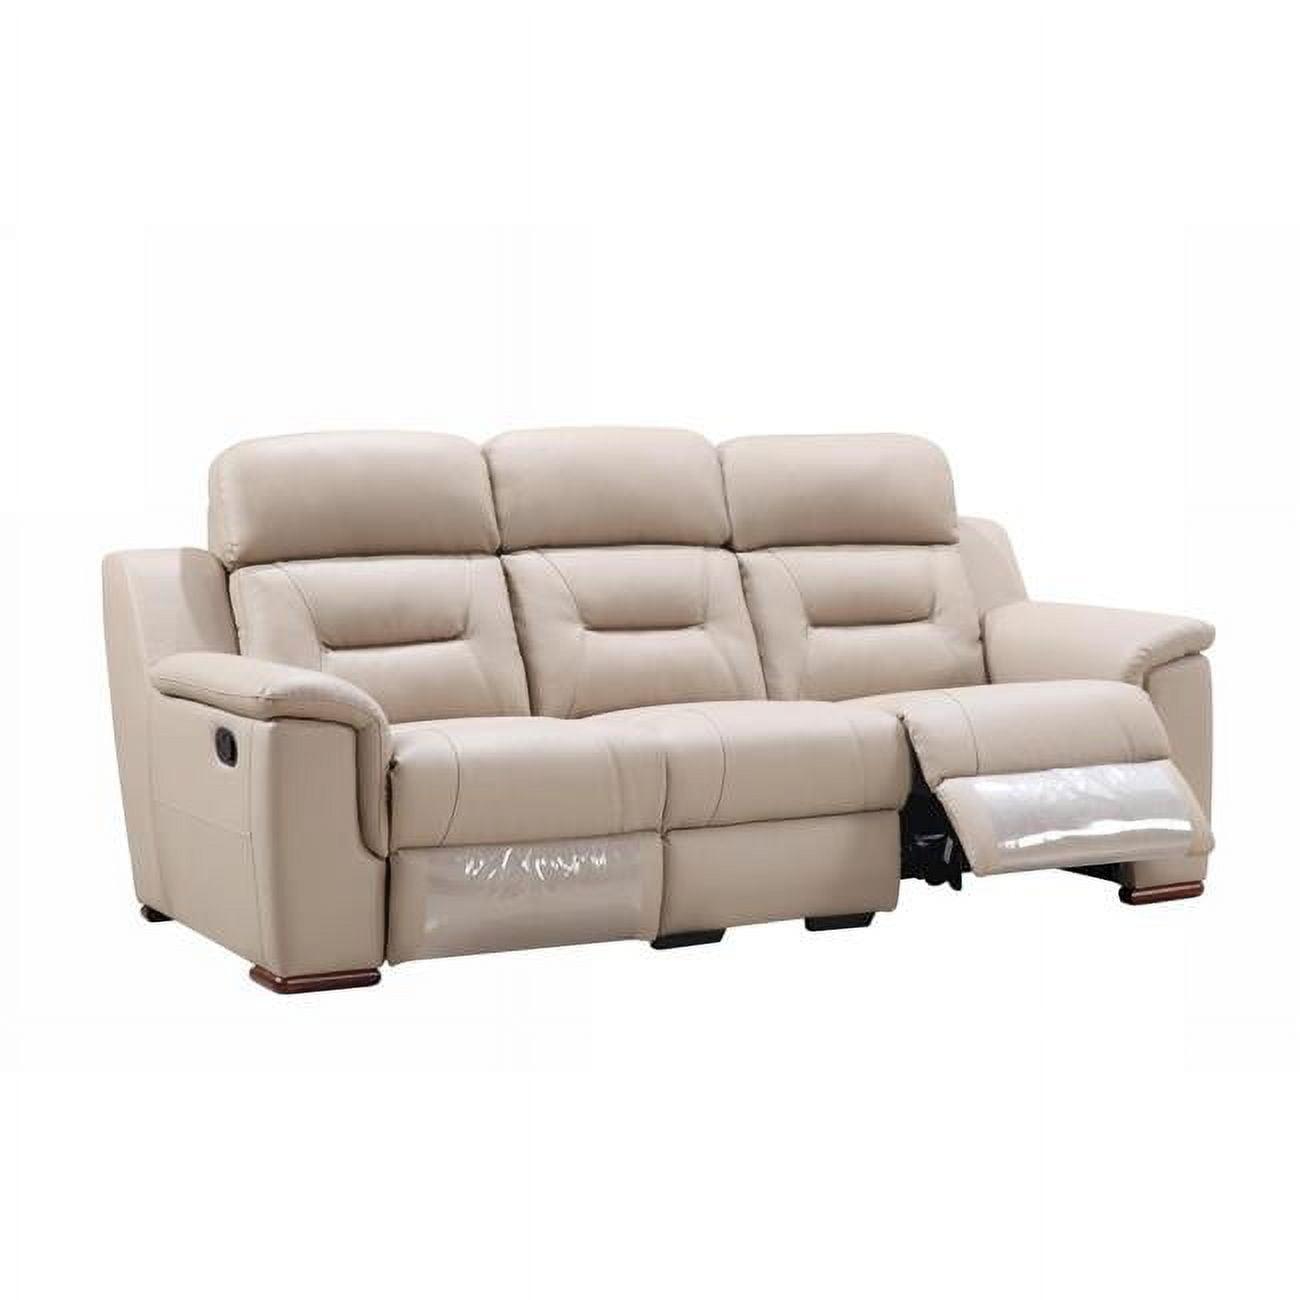 Beige Faux Leather 90" Reclining Sofa with Pillow-Top Arms